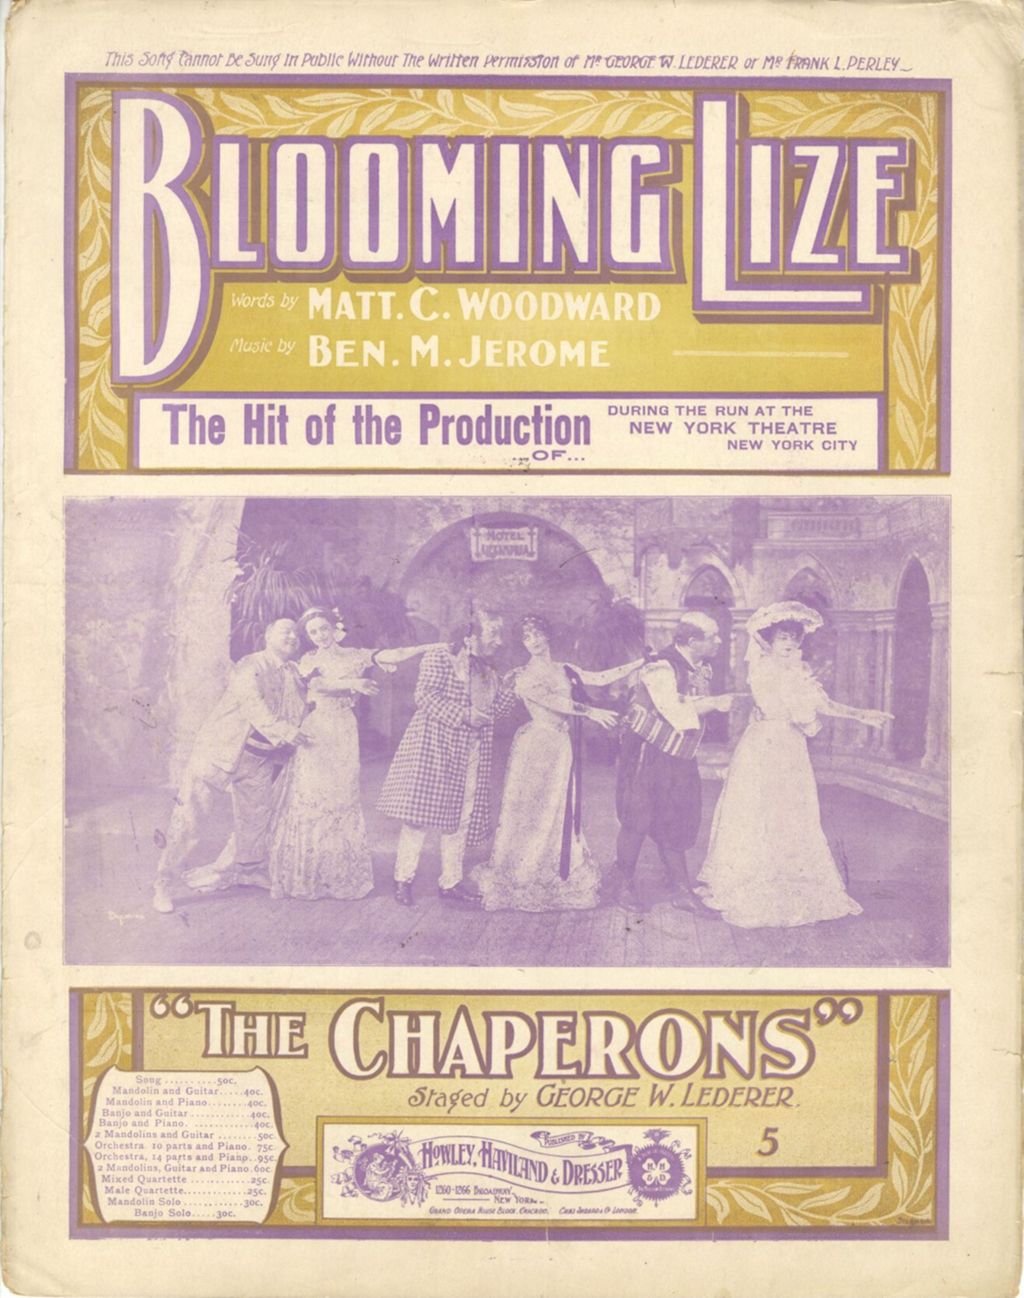 Miniature of Blooming Lize